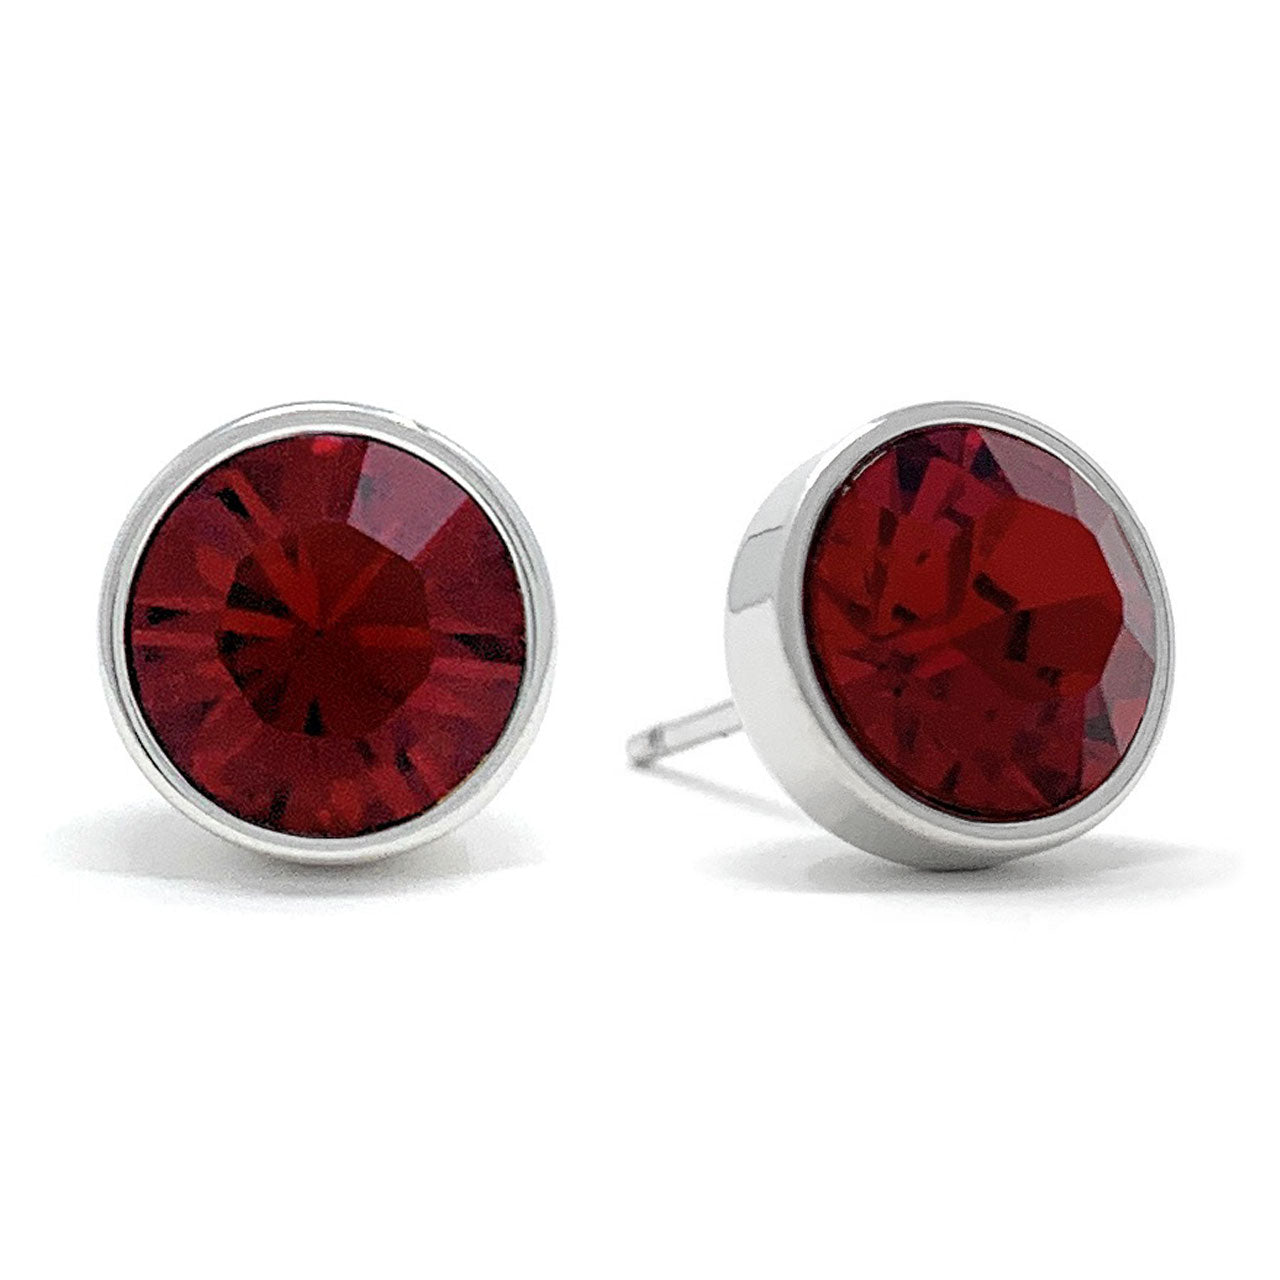 Harley Stud Earrings with Red Siam Round Crystals from Swarovski Silver Toned Rhodium Plated - Ed Heart